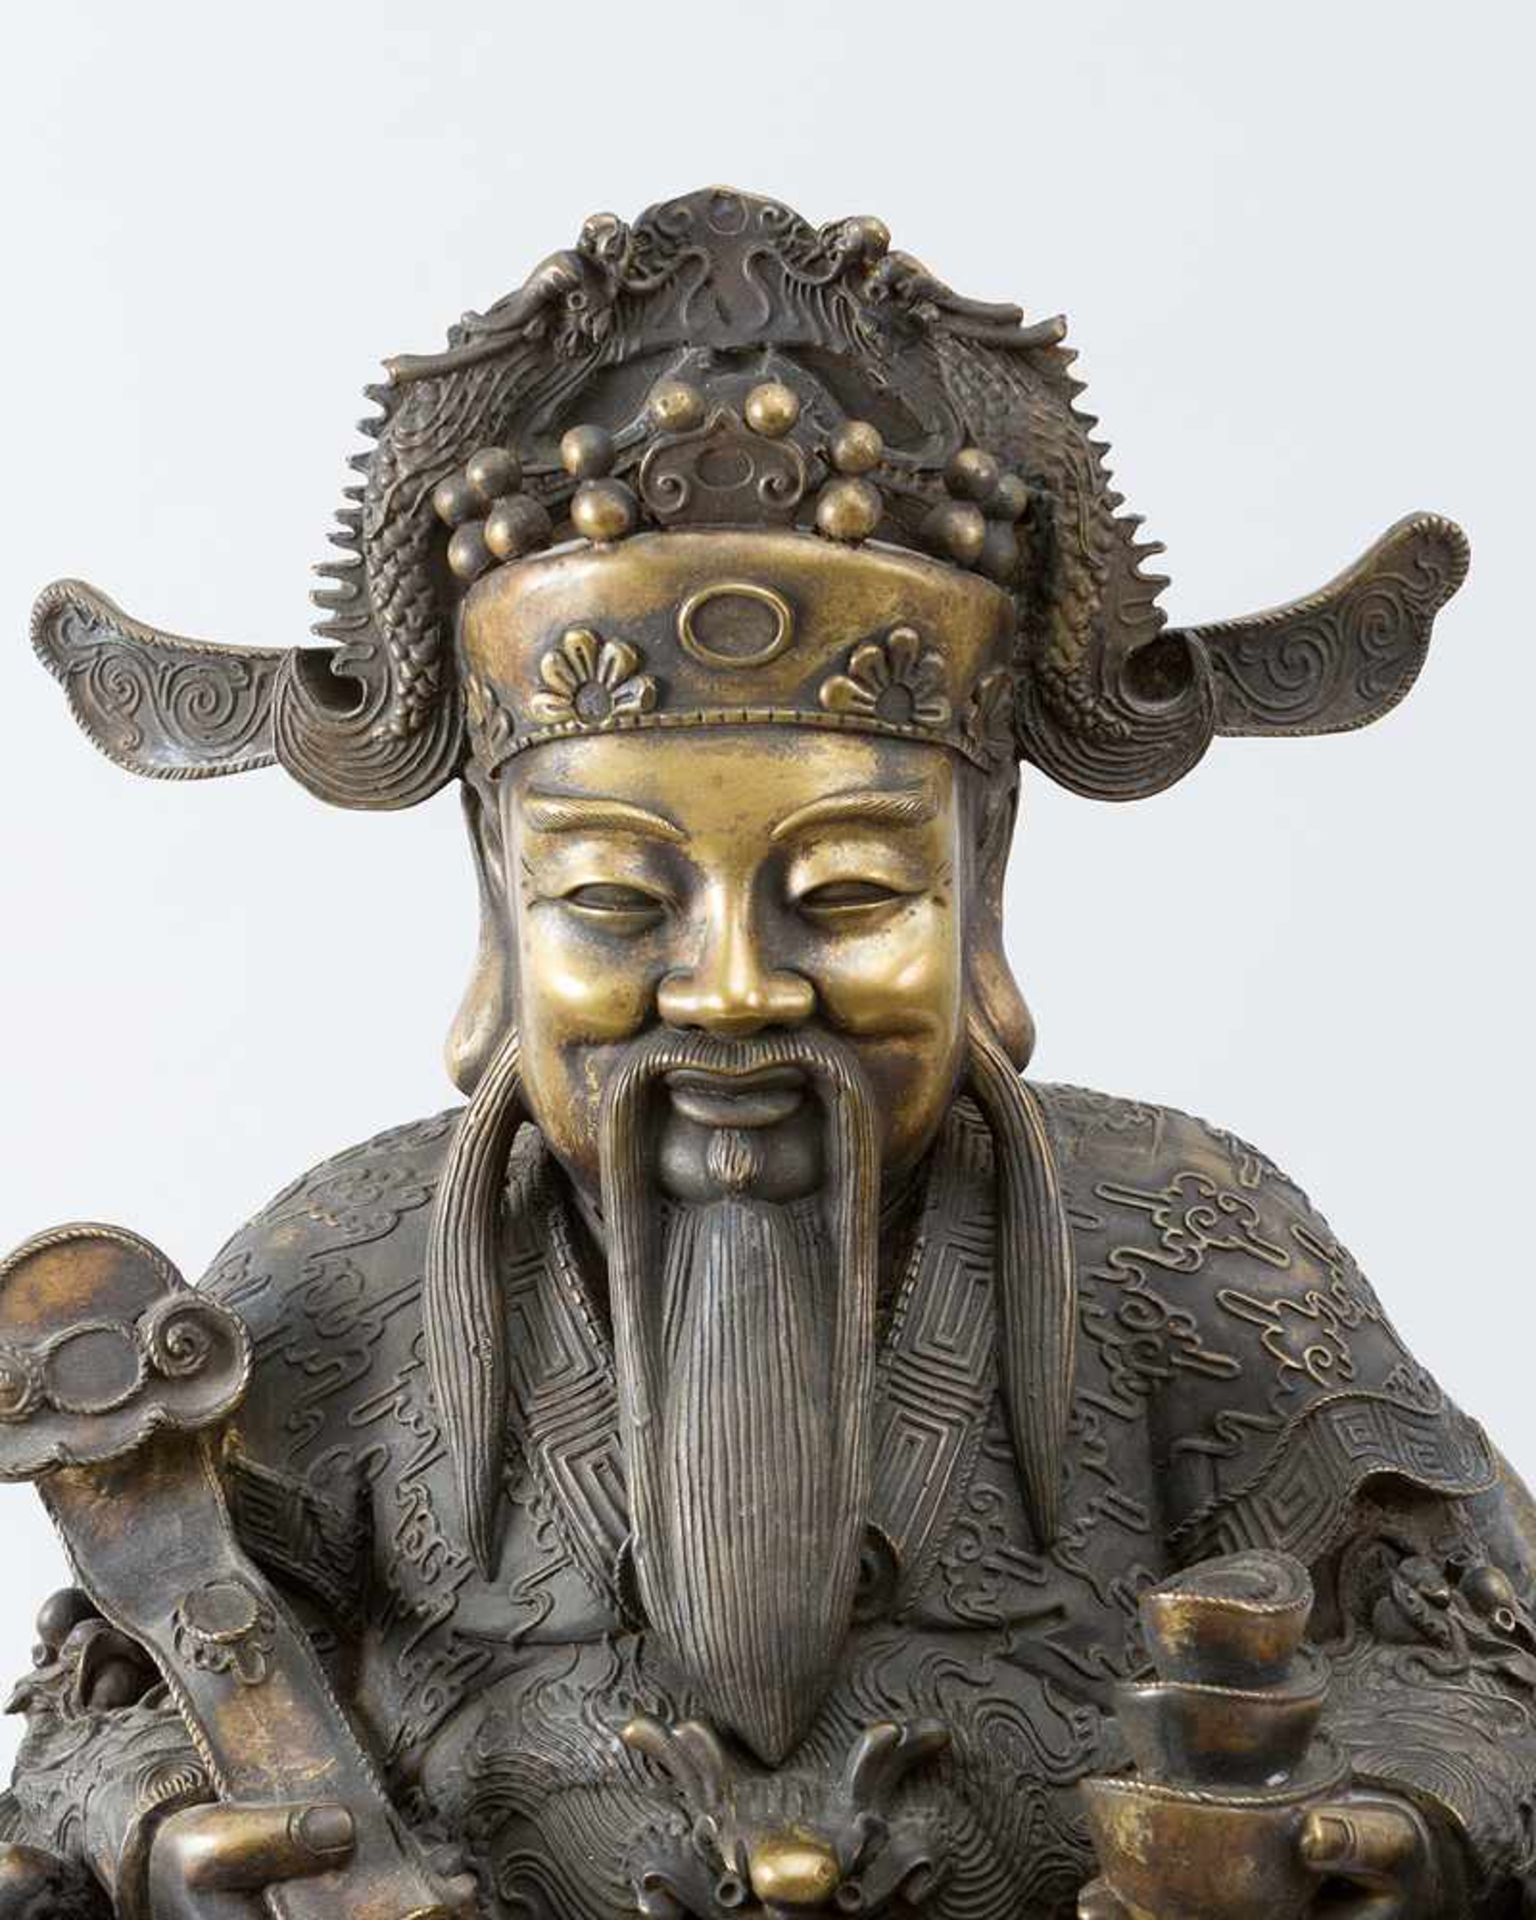 Chinese emperor sculpture - Image 2 of 3